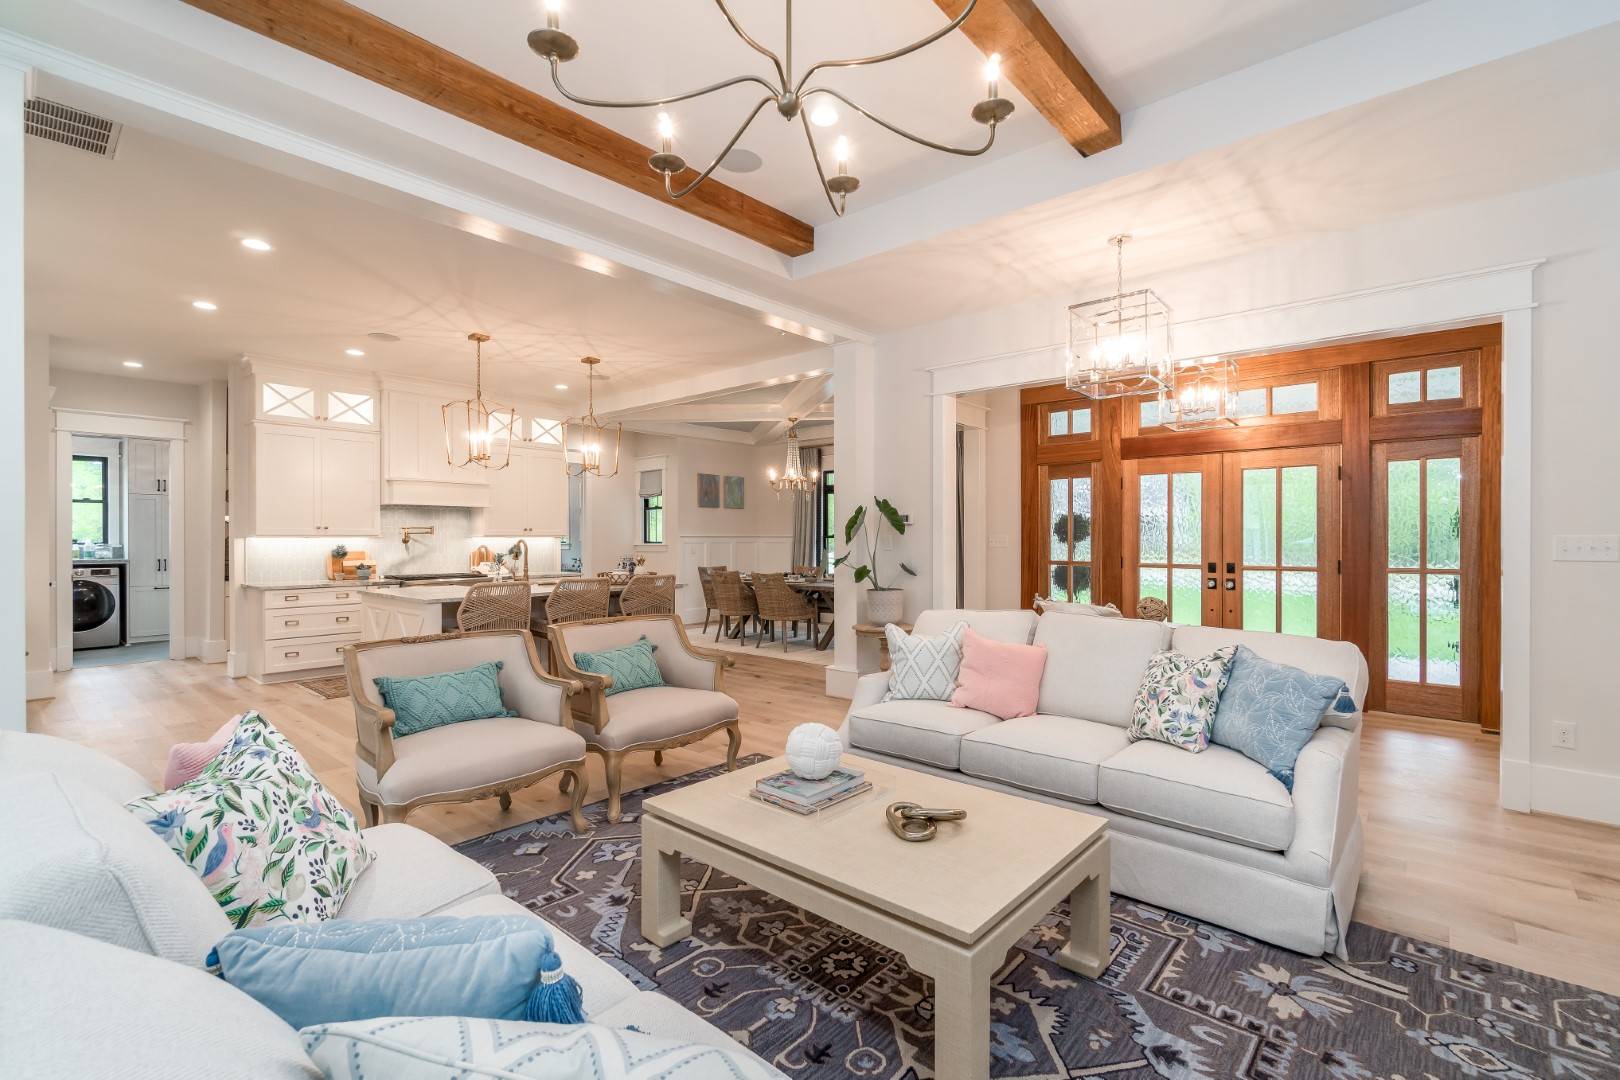 Outstanding Great room featuring Beams and High Ceilings image of Ruth Ann House Plan